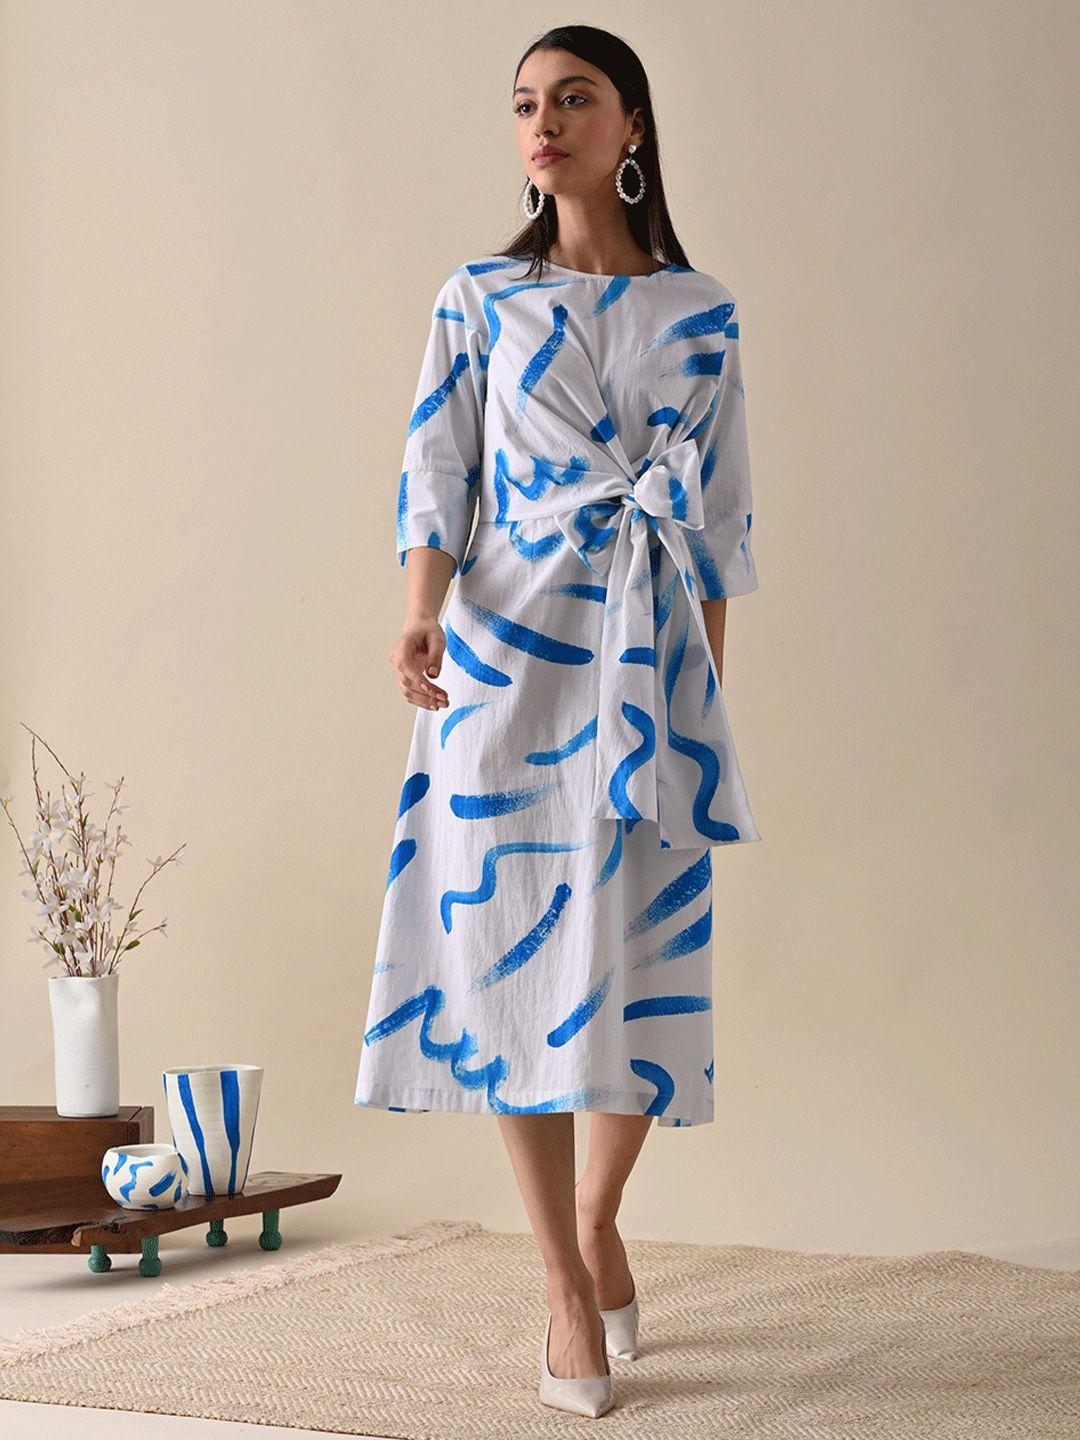 kanelle claire abstract printed a-line midi organic cotton dress